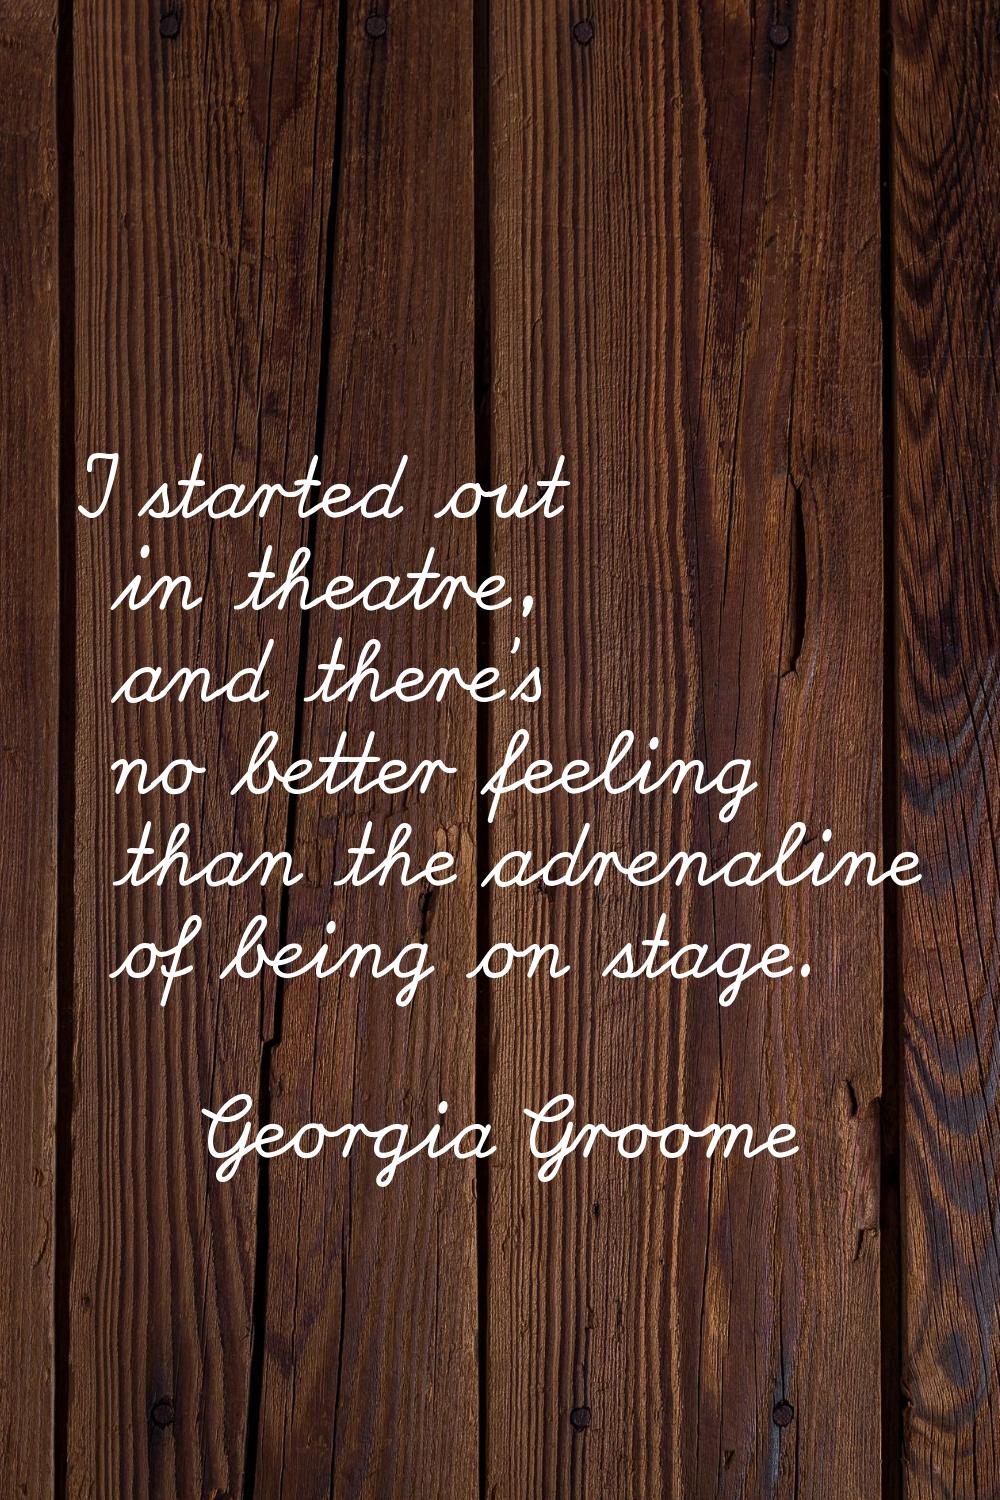 I started out in theatre, and there's no better feeling than the adrenaline of being on stage.